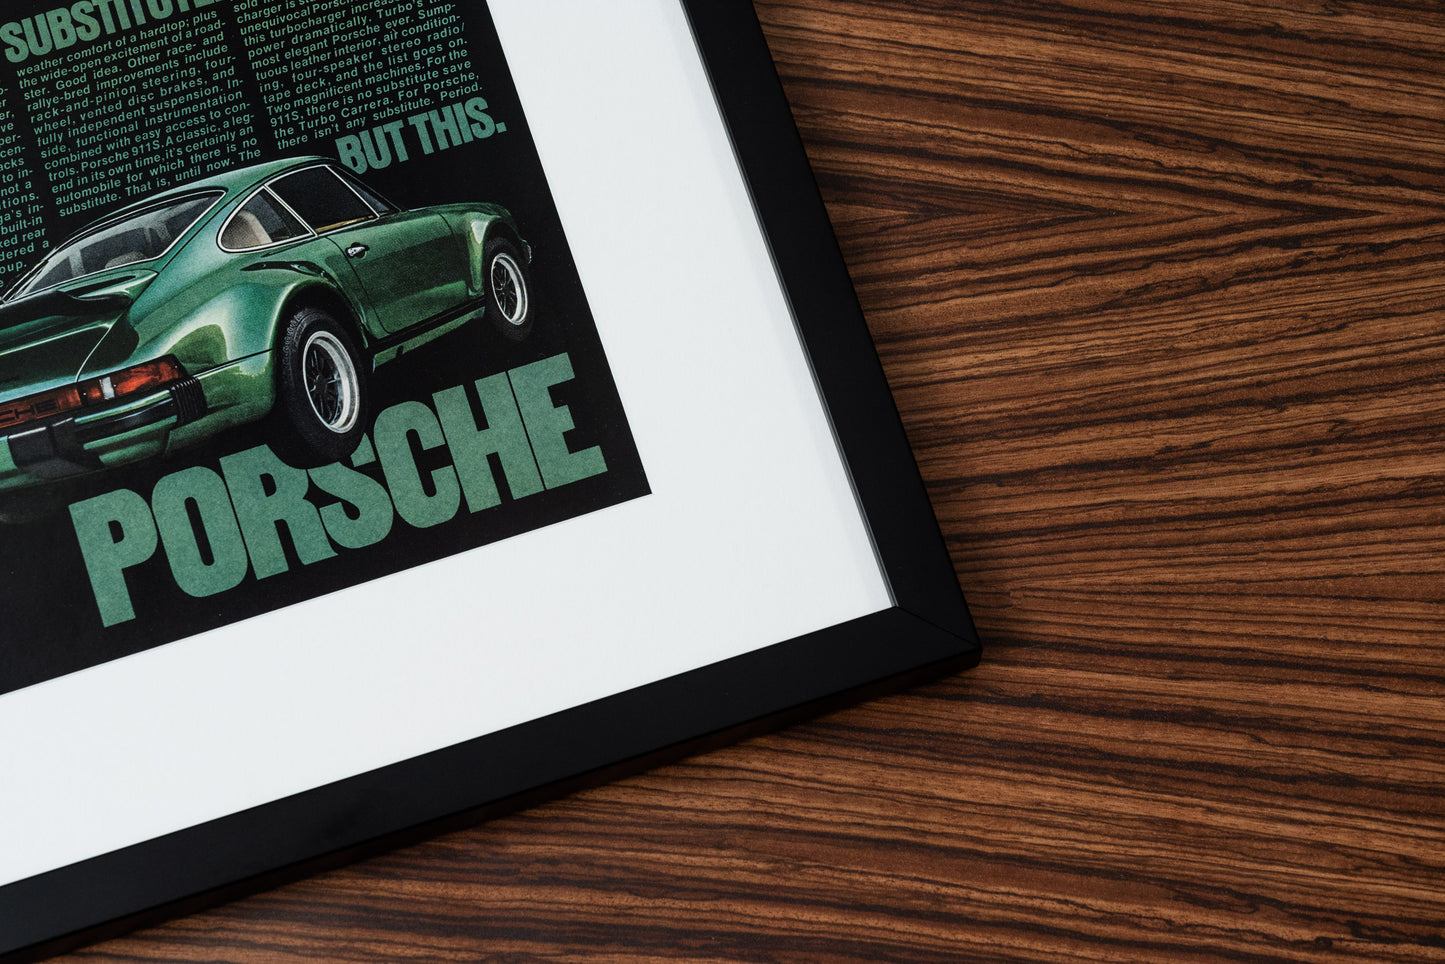 Porsche - 'There Is No Substitute'